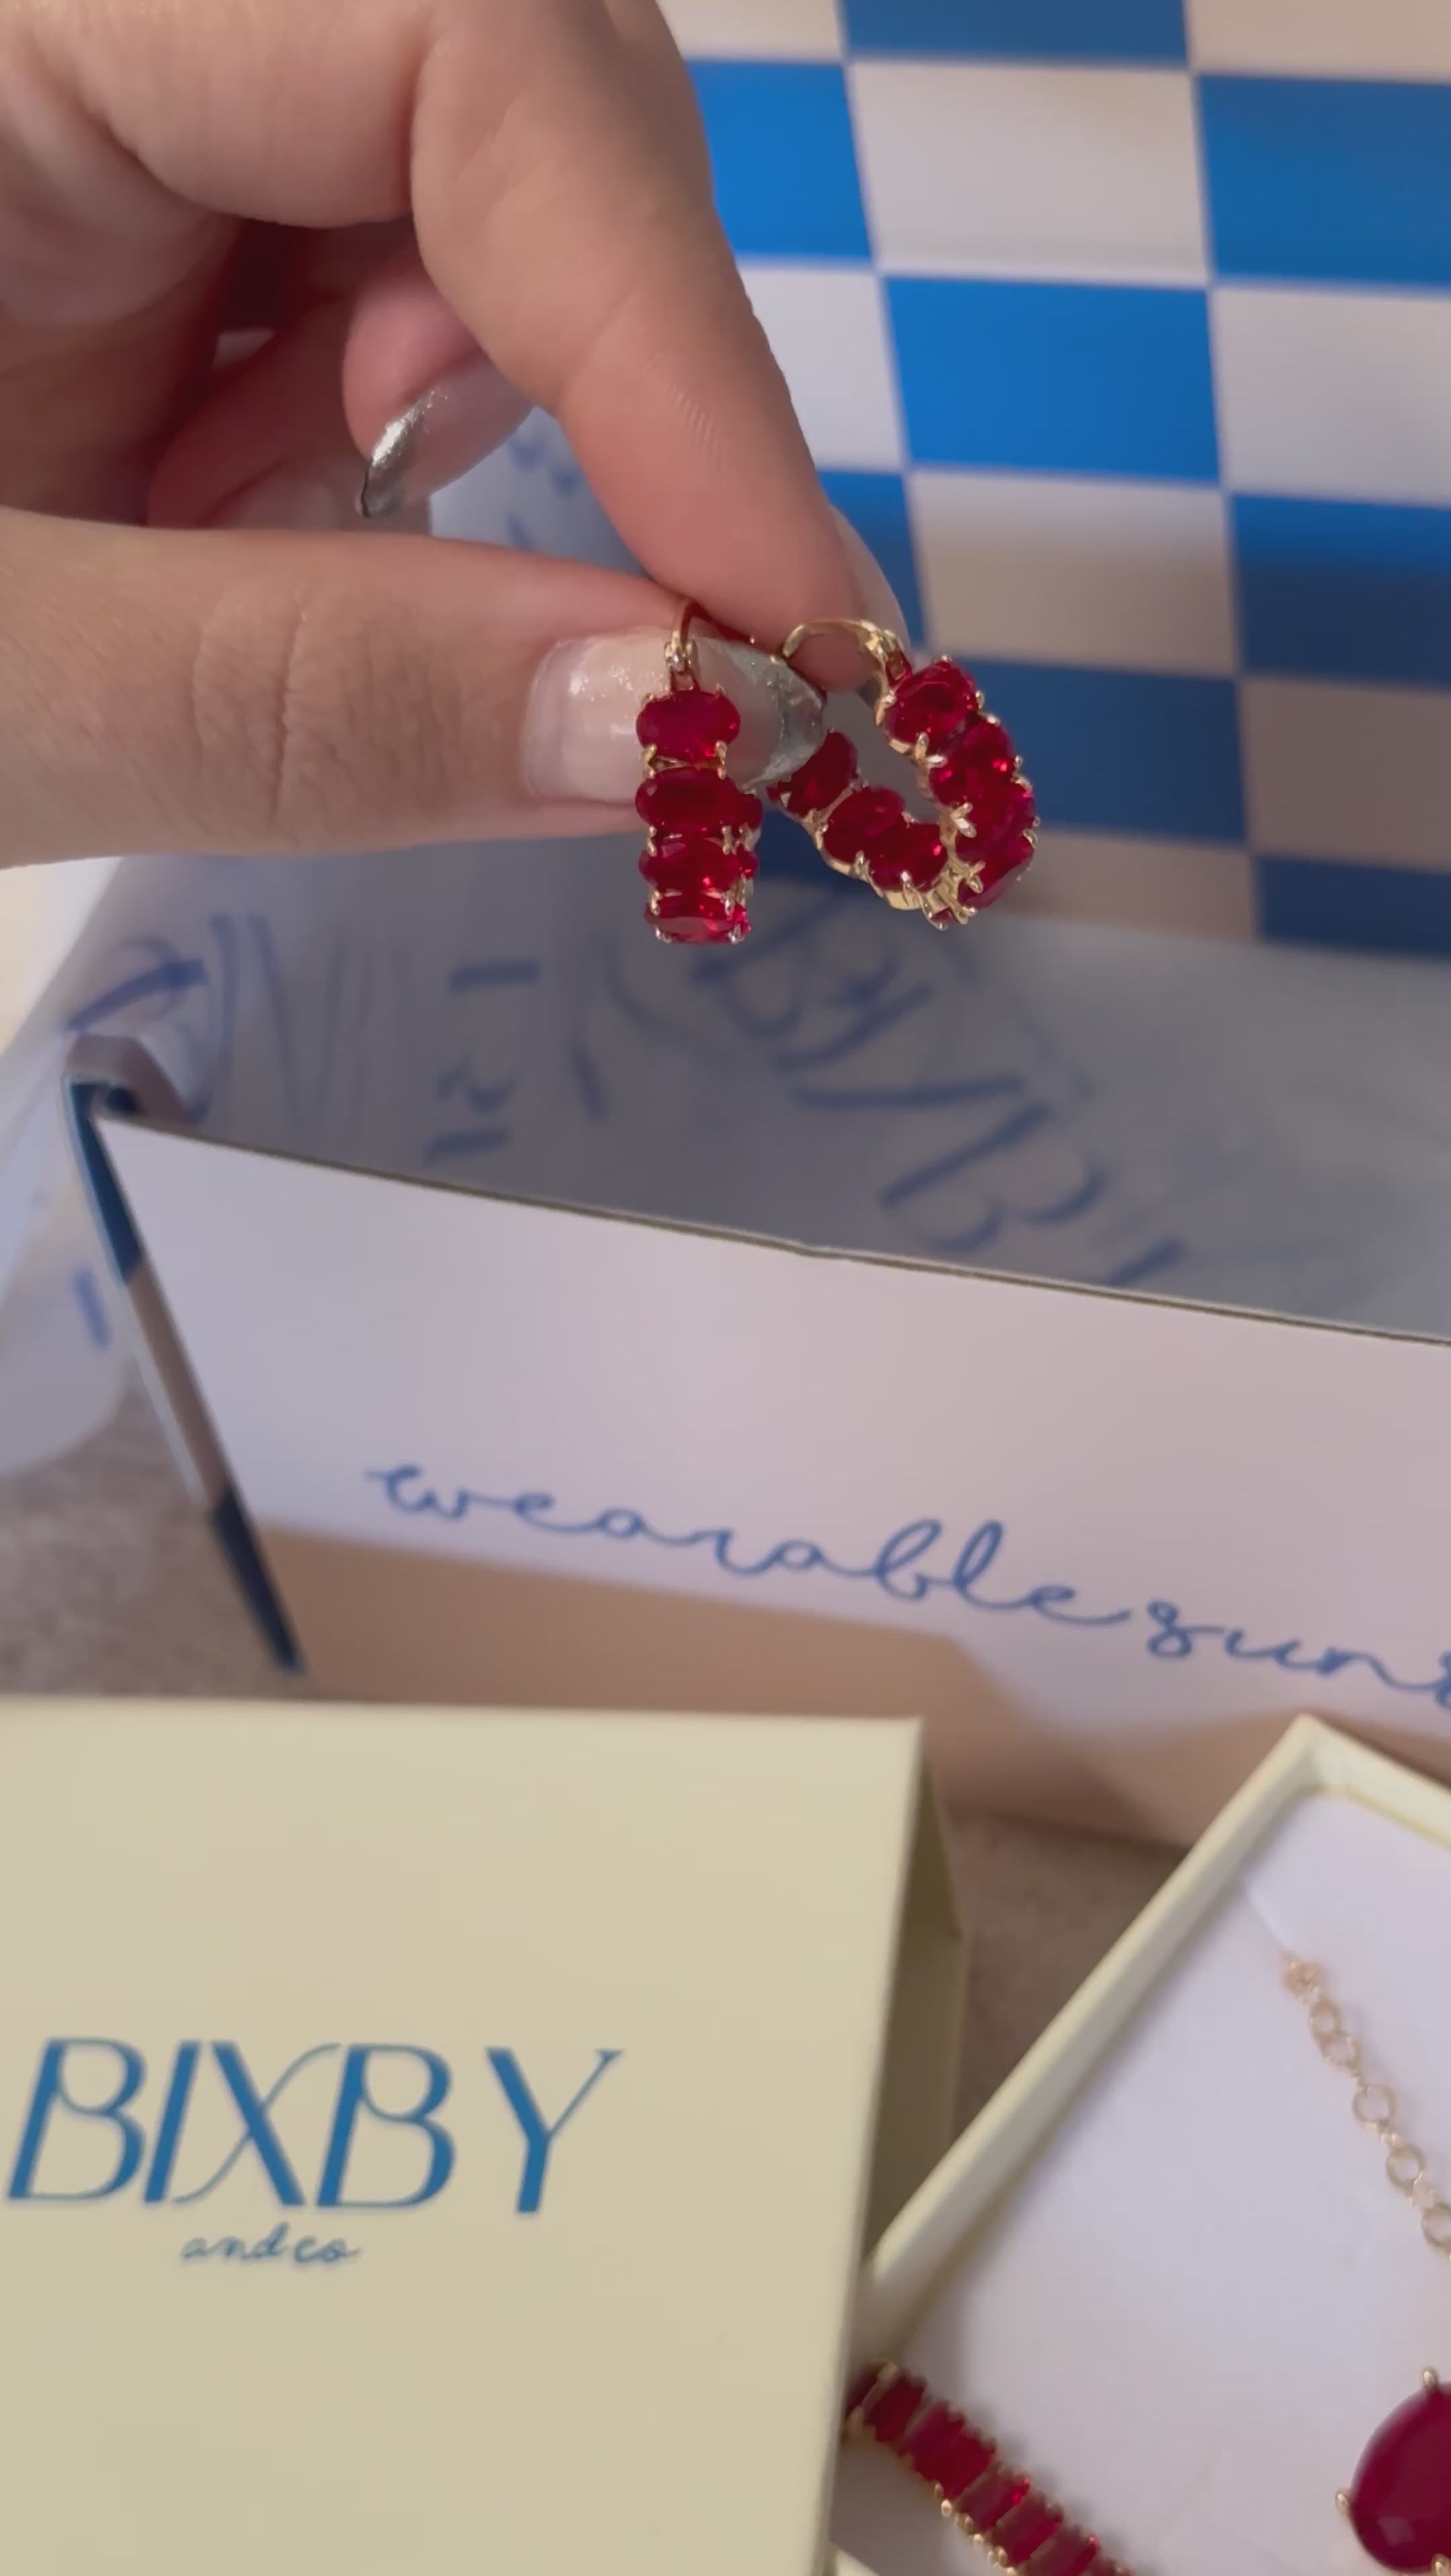 video of Bixby packaging showing off the red Isolde Hoops